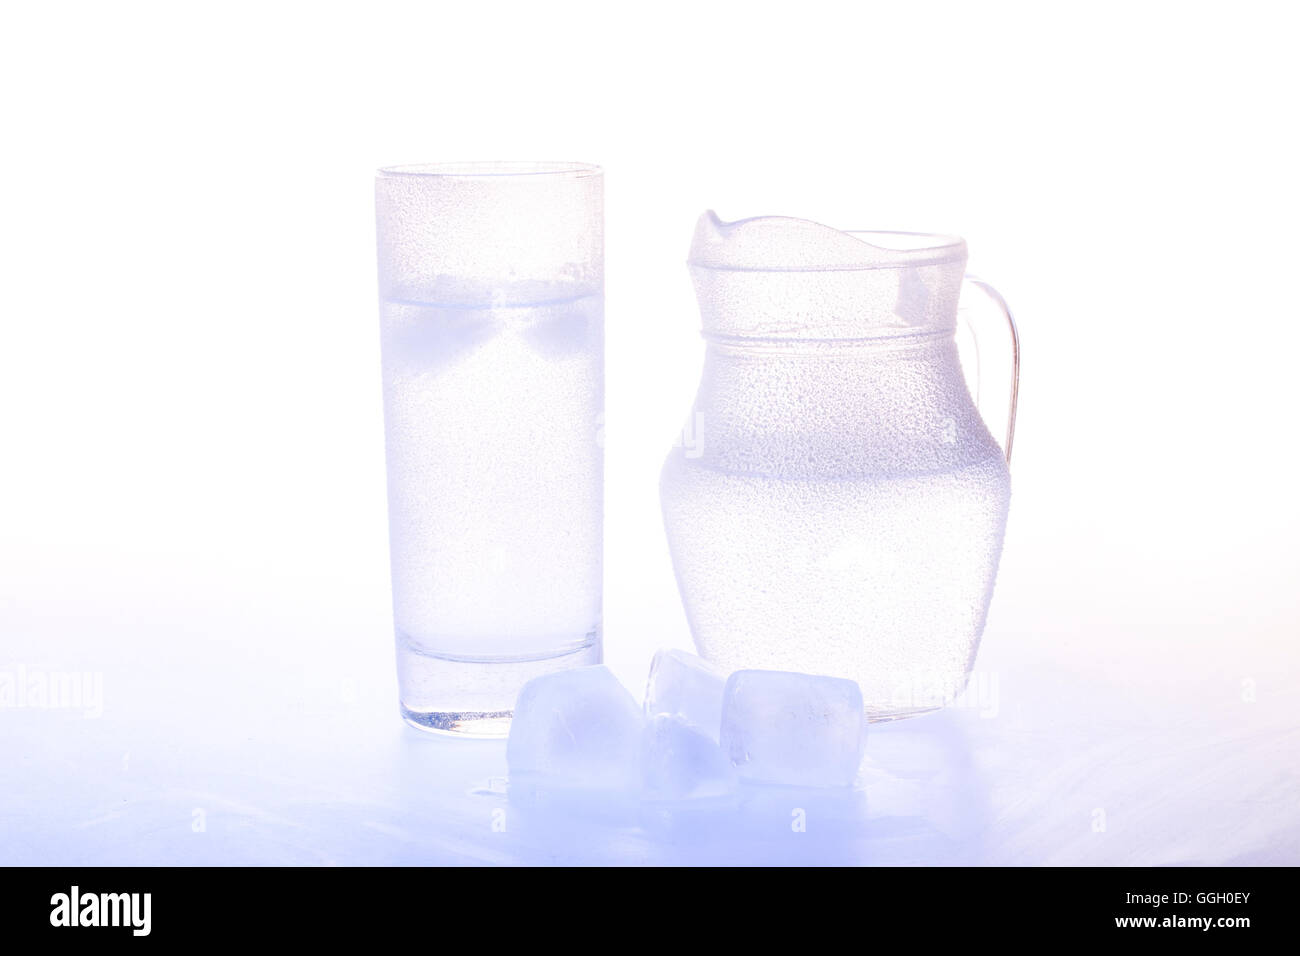 Jug and glass with ice water Stock Photo